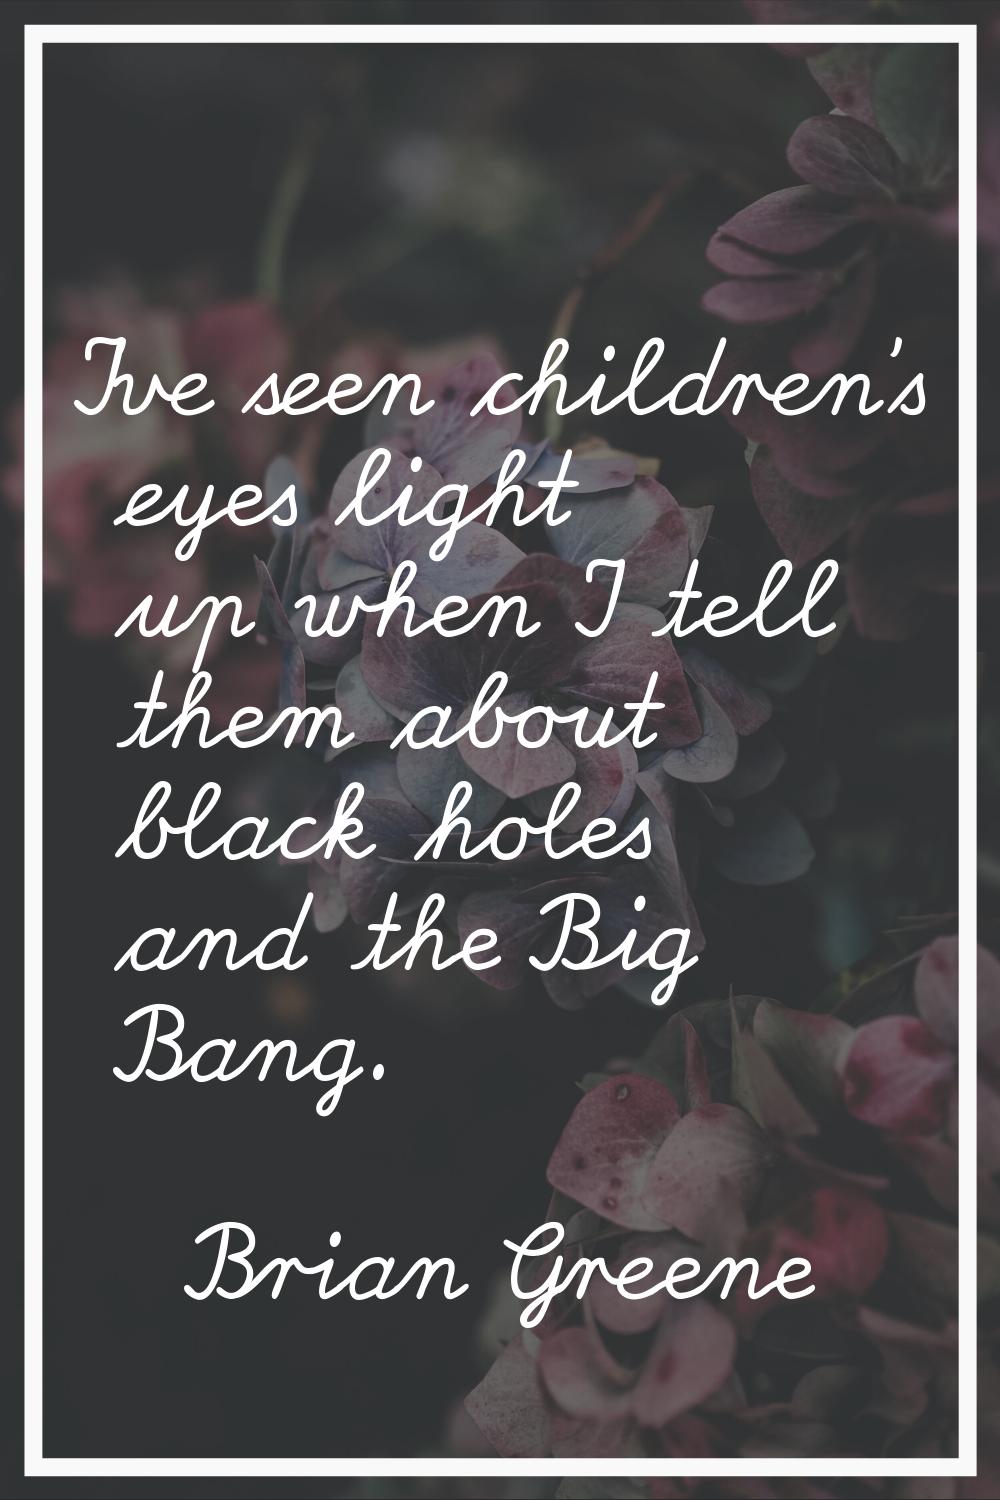 I've seen children's eyes light up when I tell them about black holes and the Big Bang.